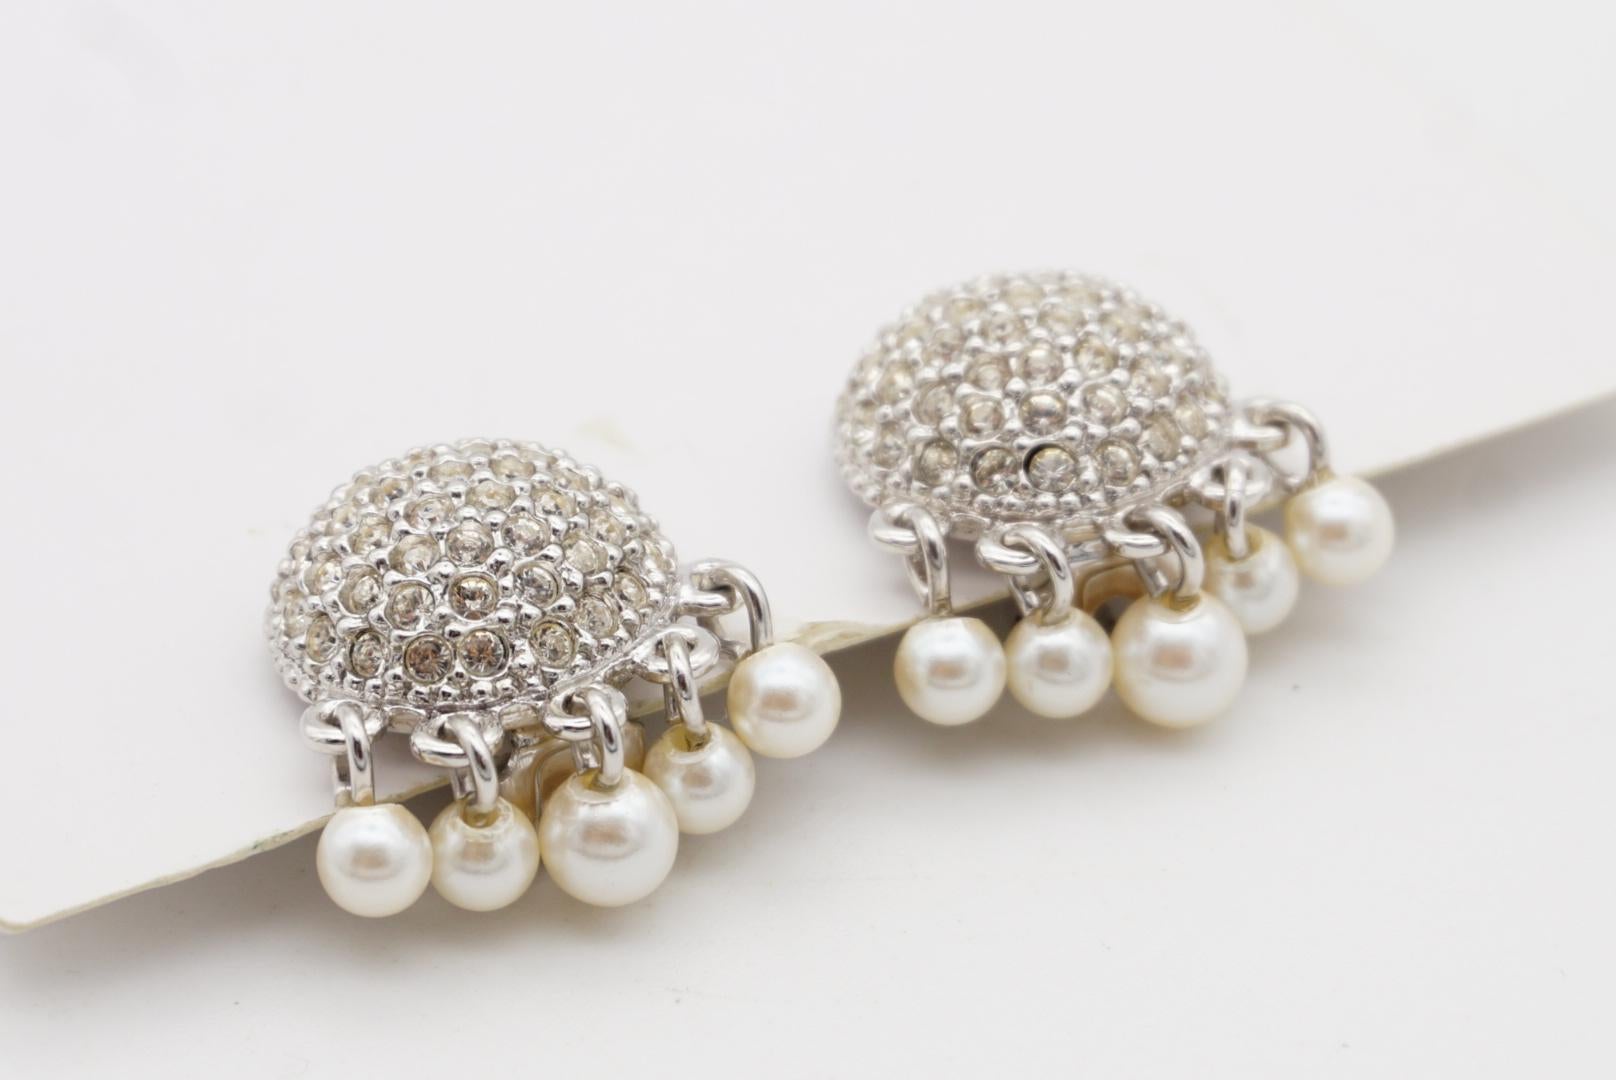 Christian Dior Vintage 1980s Whole Crystals Round Tassel Pearls Clip Earrings For Sale 4